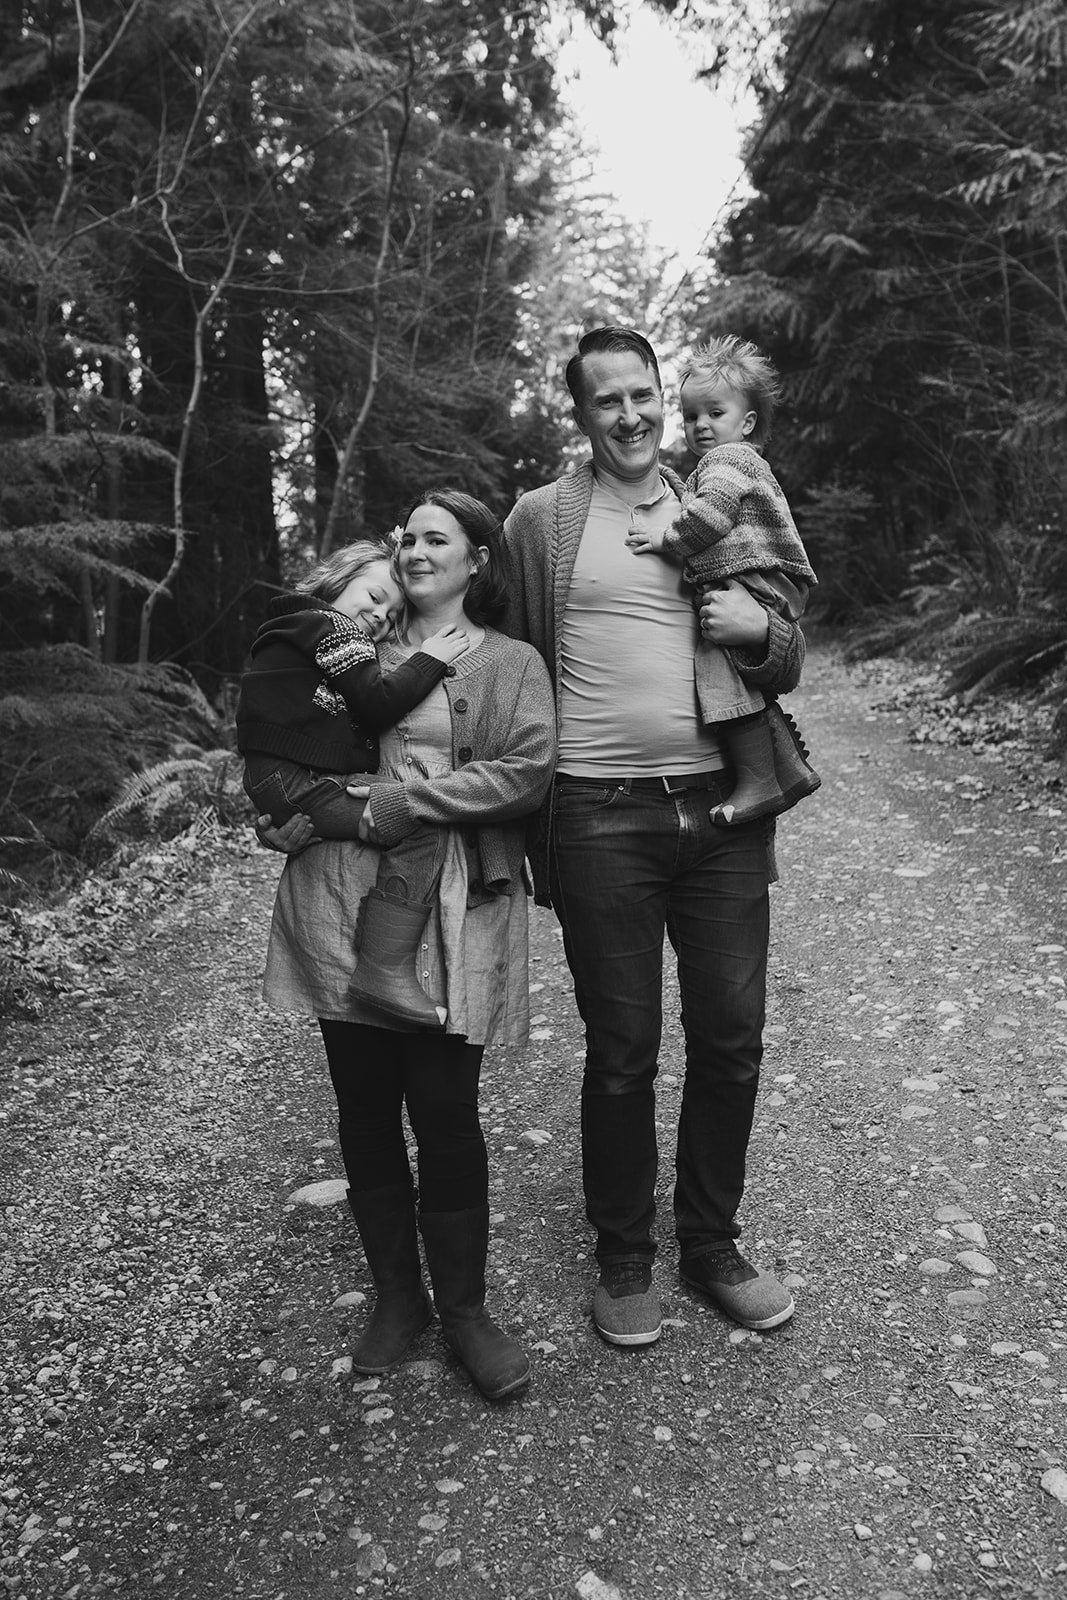 family portrait, mother and father hold one child each in their arms while standing on a path in the woods